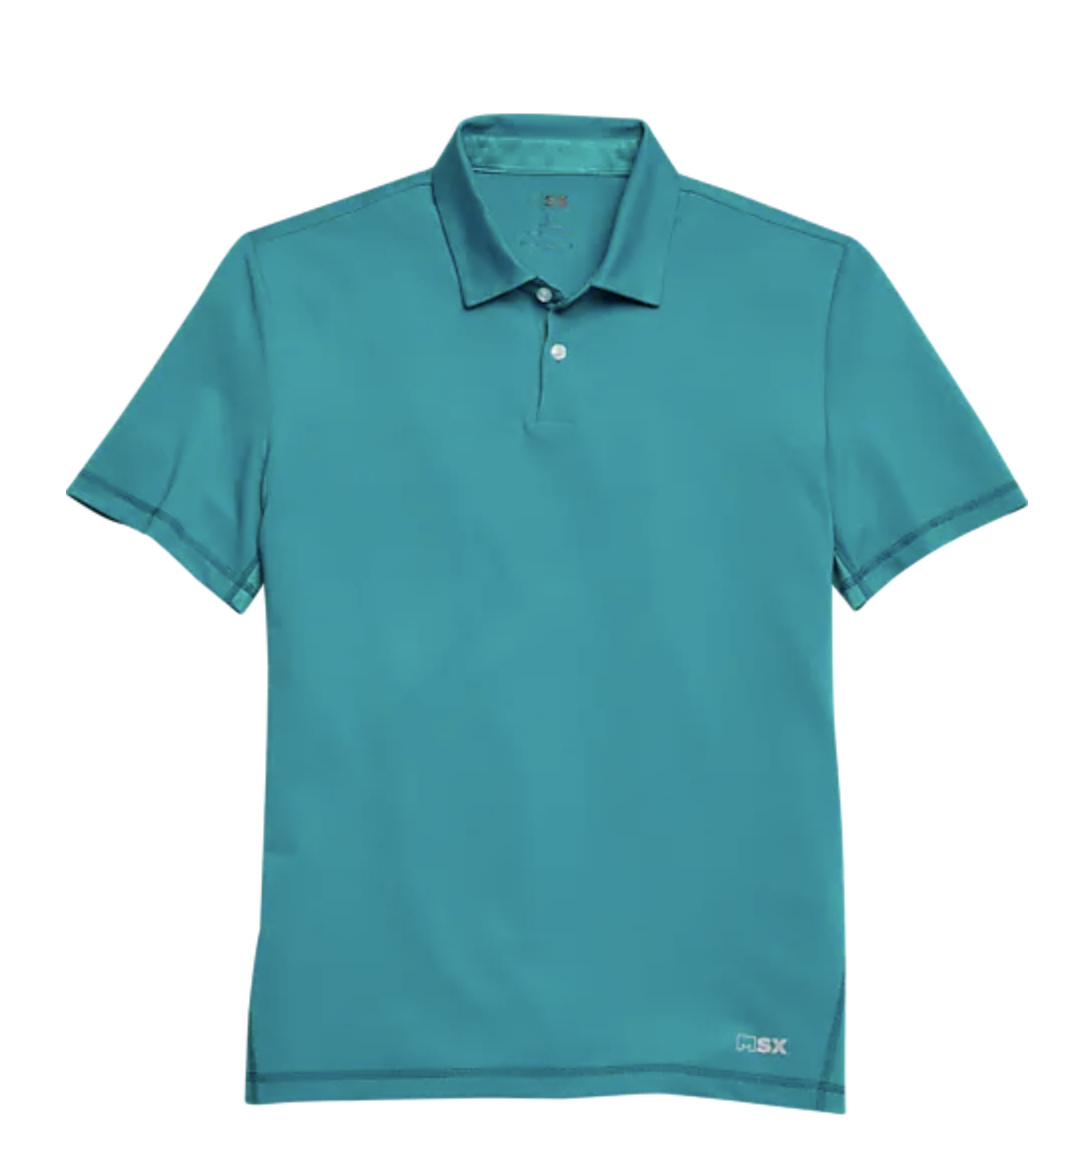 the short-sleeved polo shirt in teal 